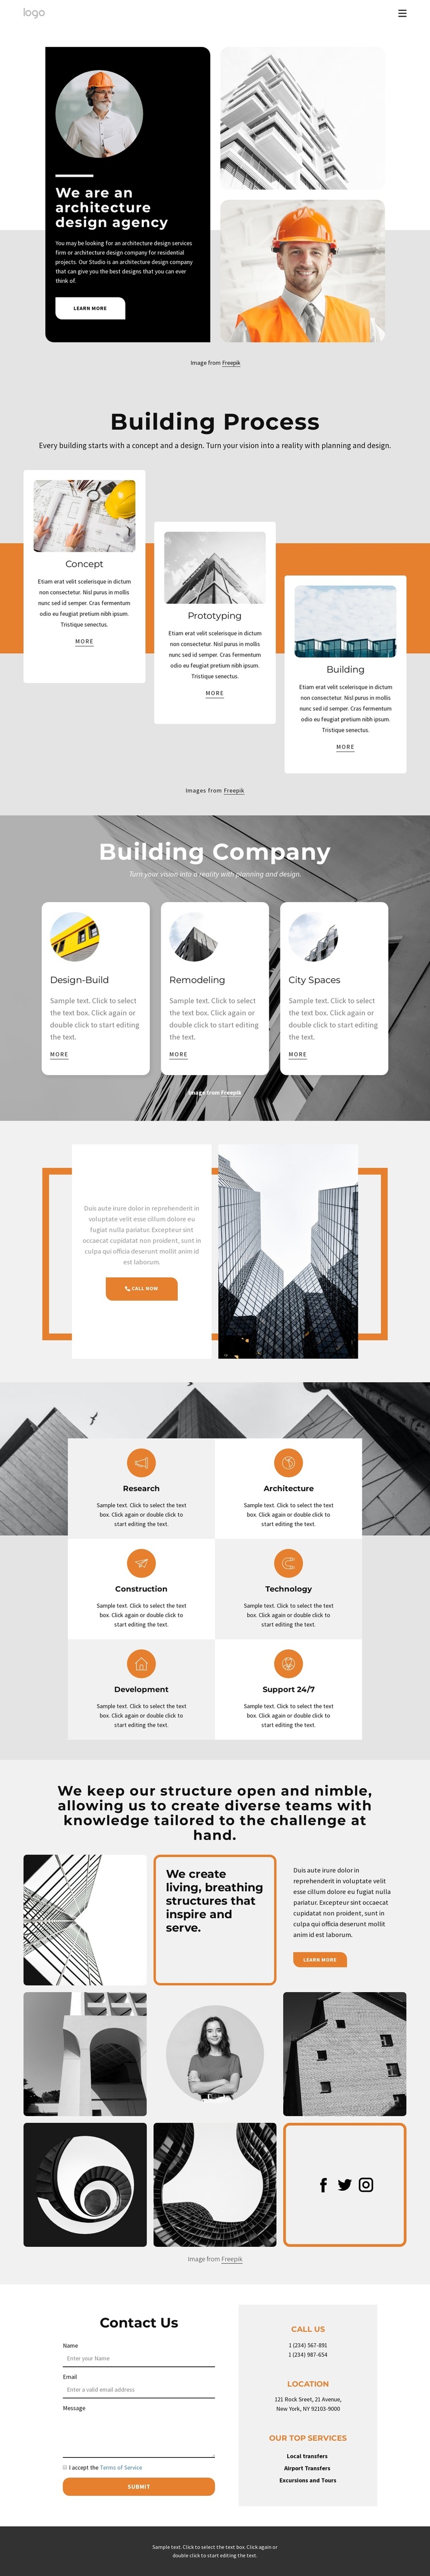 International design firm One Page Template